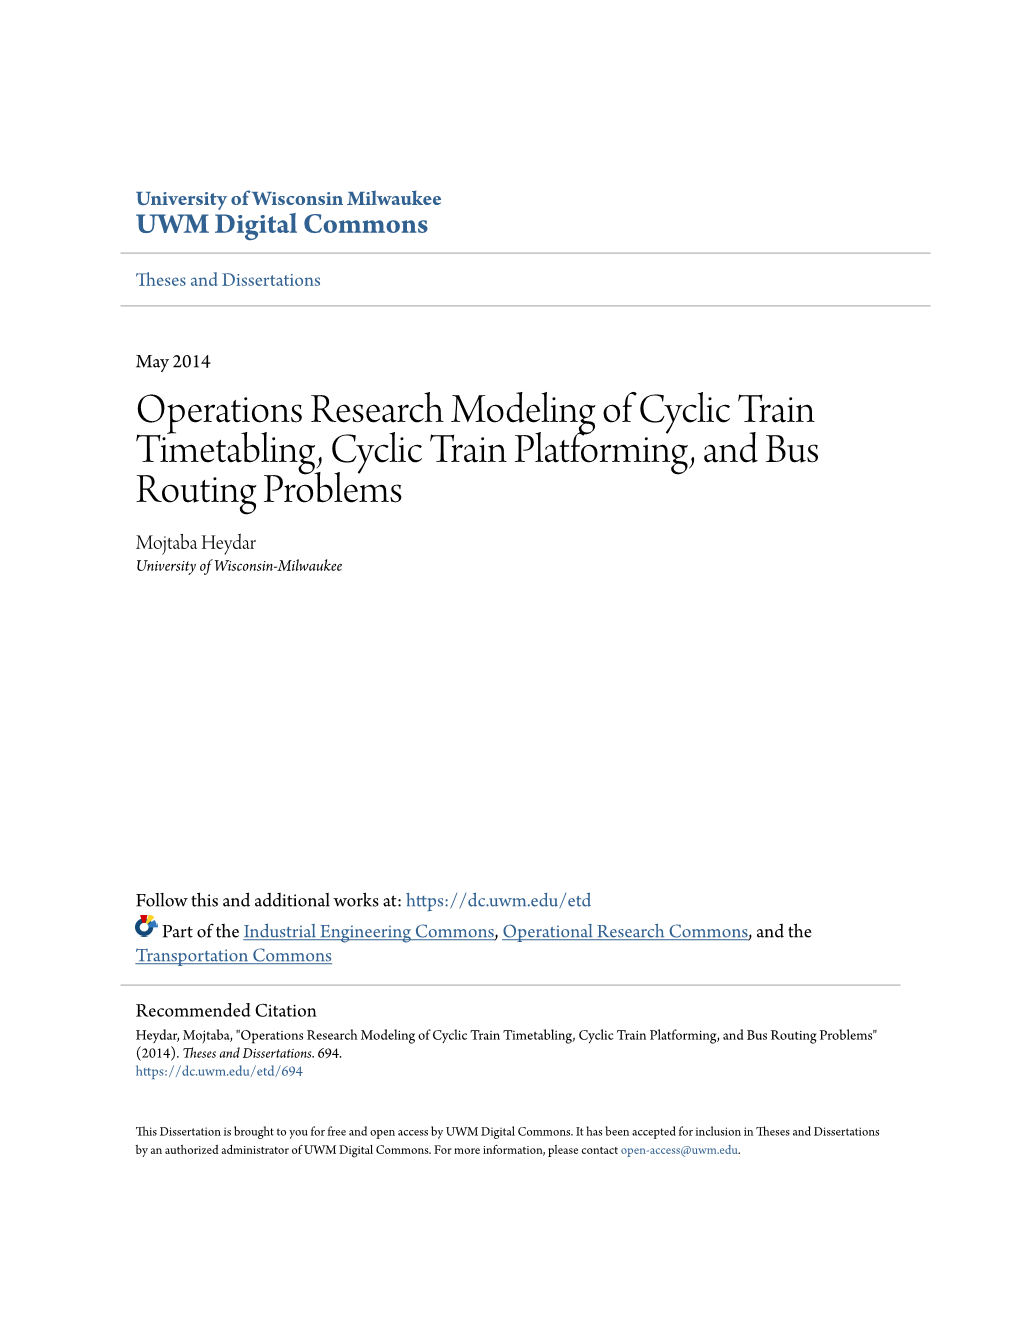 Operations Research Modeling of Cyclic Train Timetabling, Cyclic Train Platforming, and Bus Routing Problems Mojtaba Heydar University of Wisconsin-Milwaukee